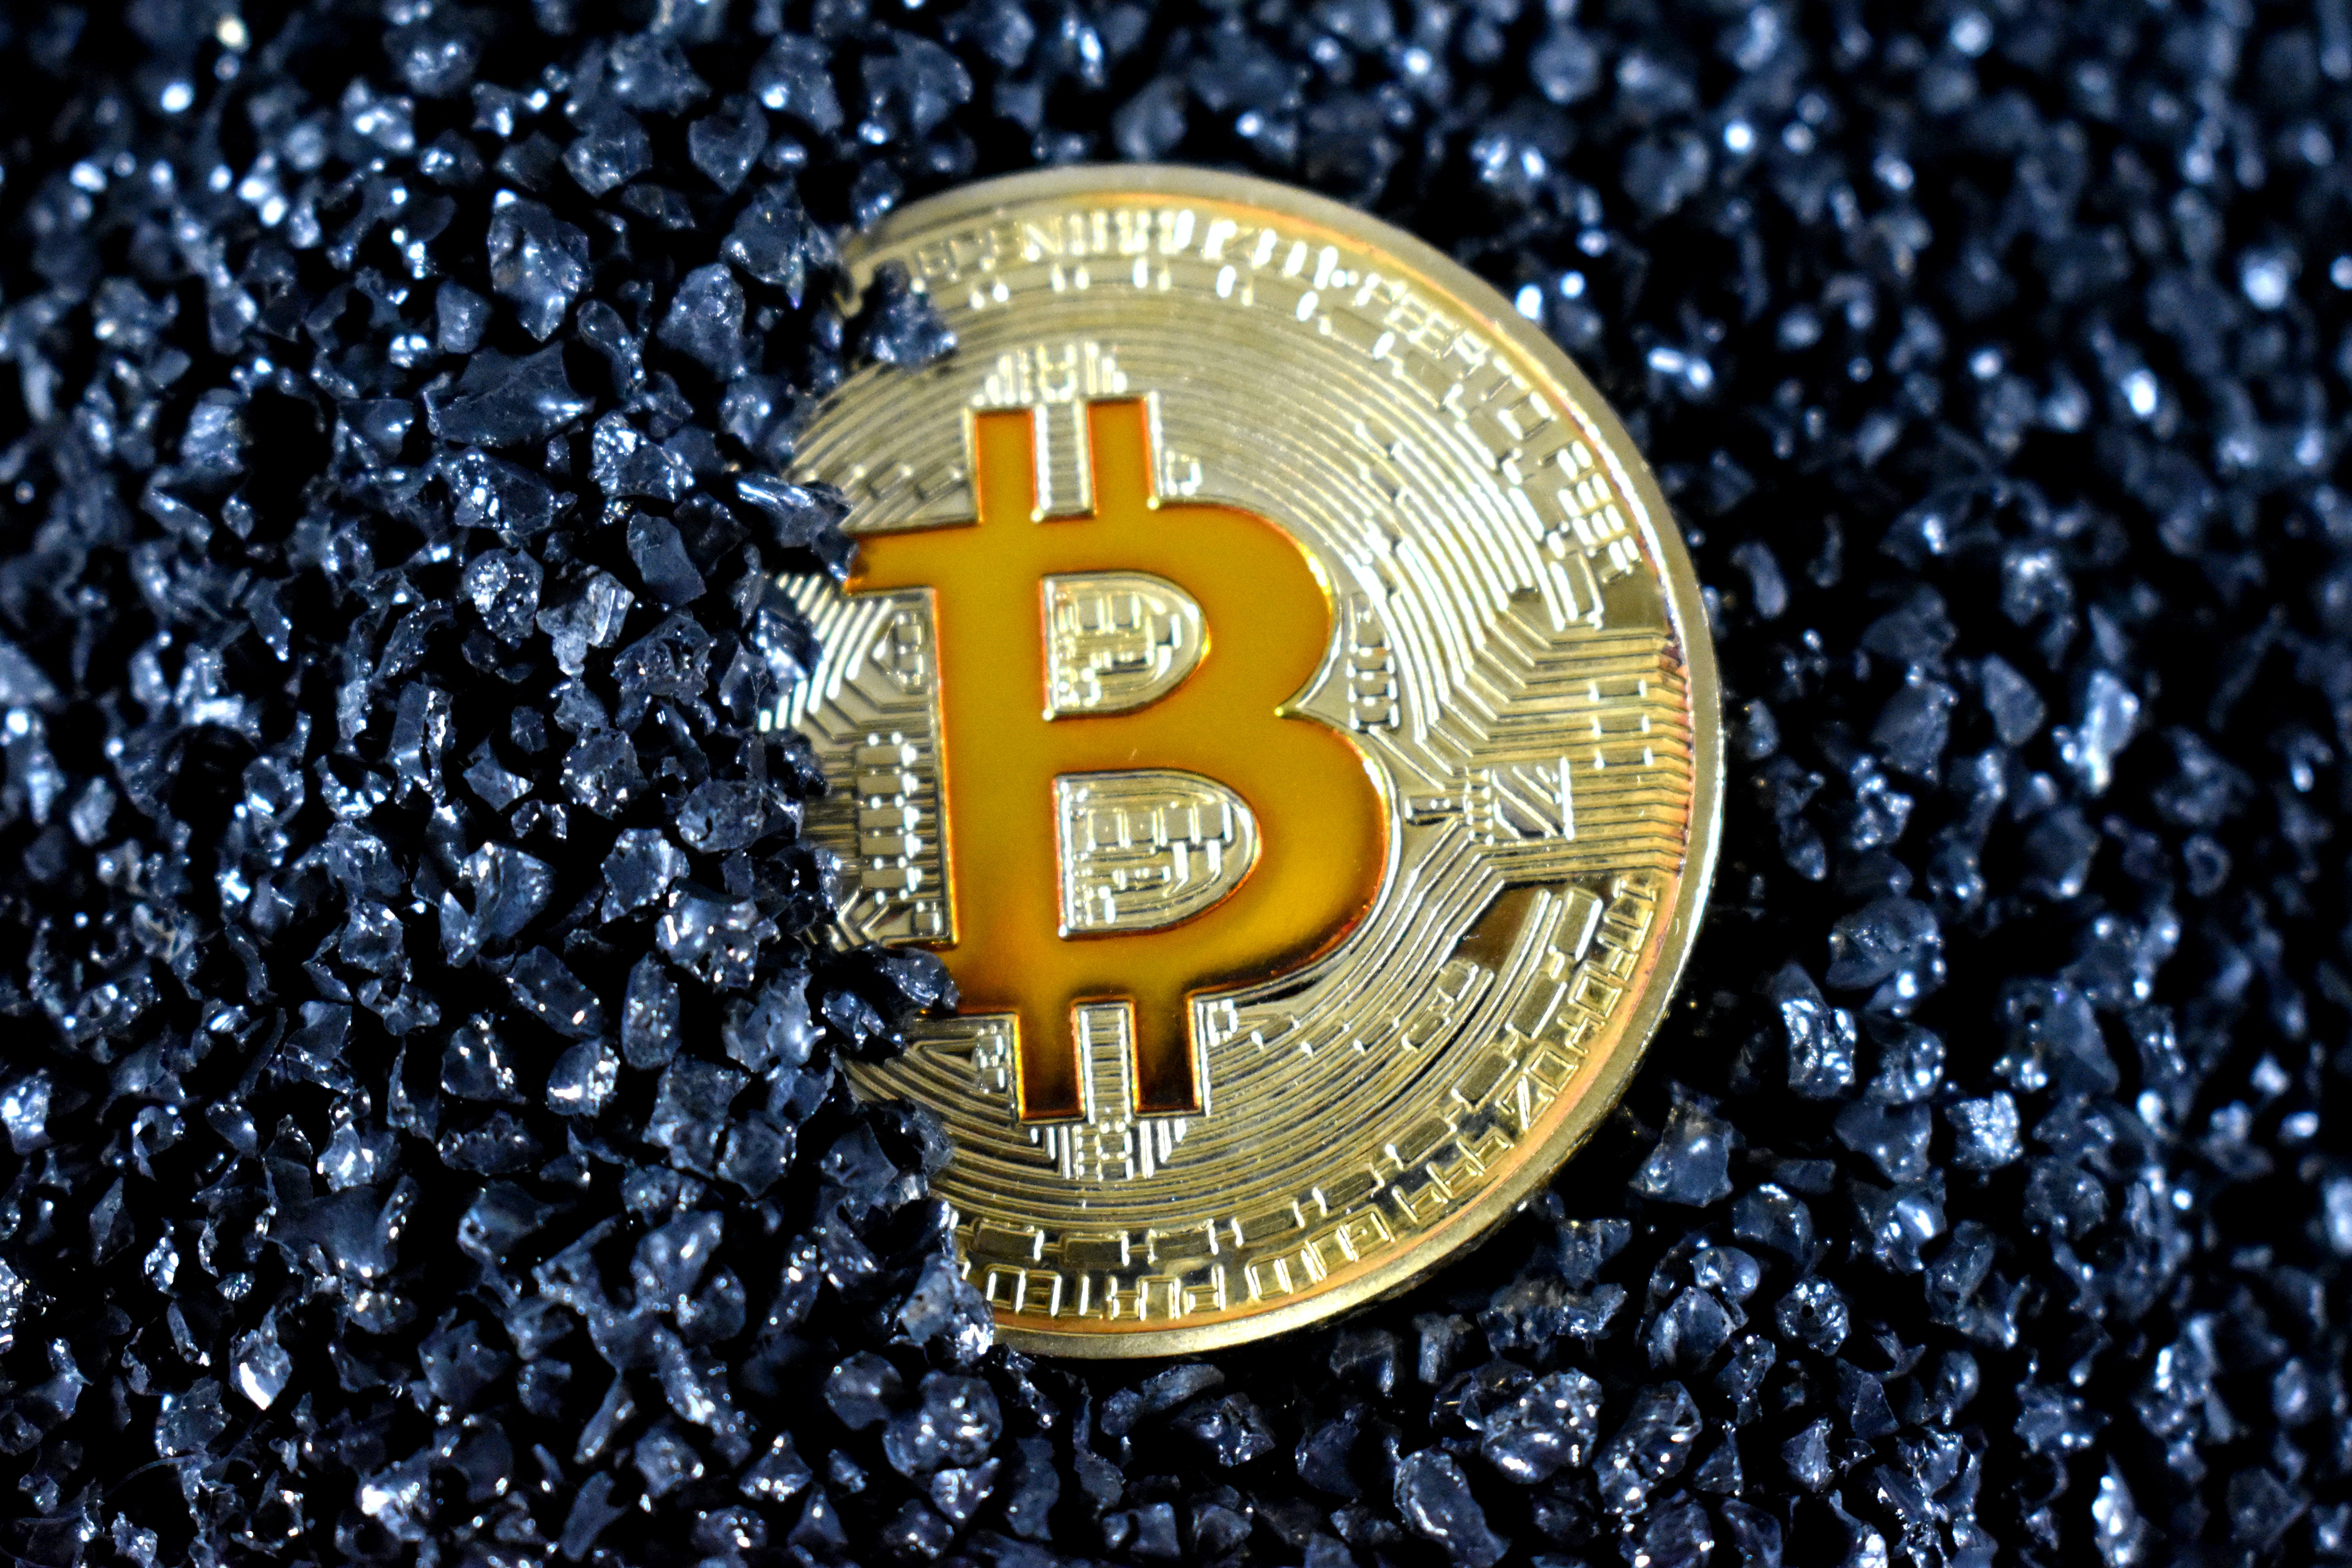 Bitcoin Volume Dropping Could Suggest The Downtrend Is Diminishing